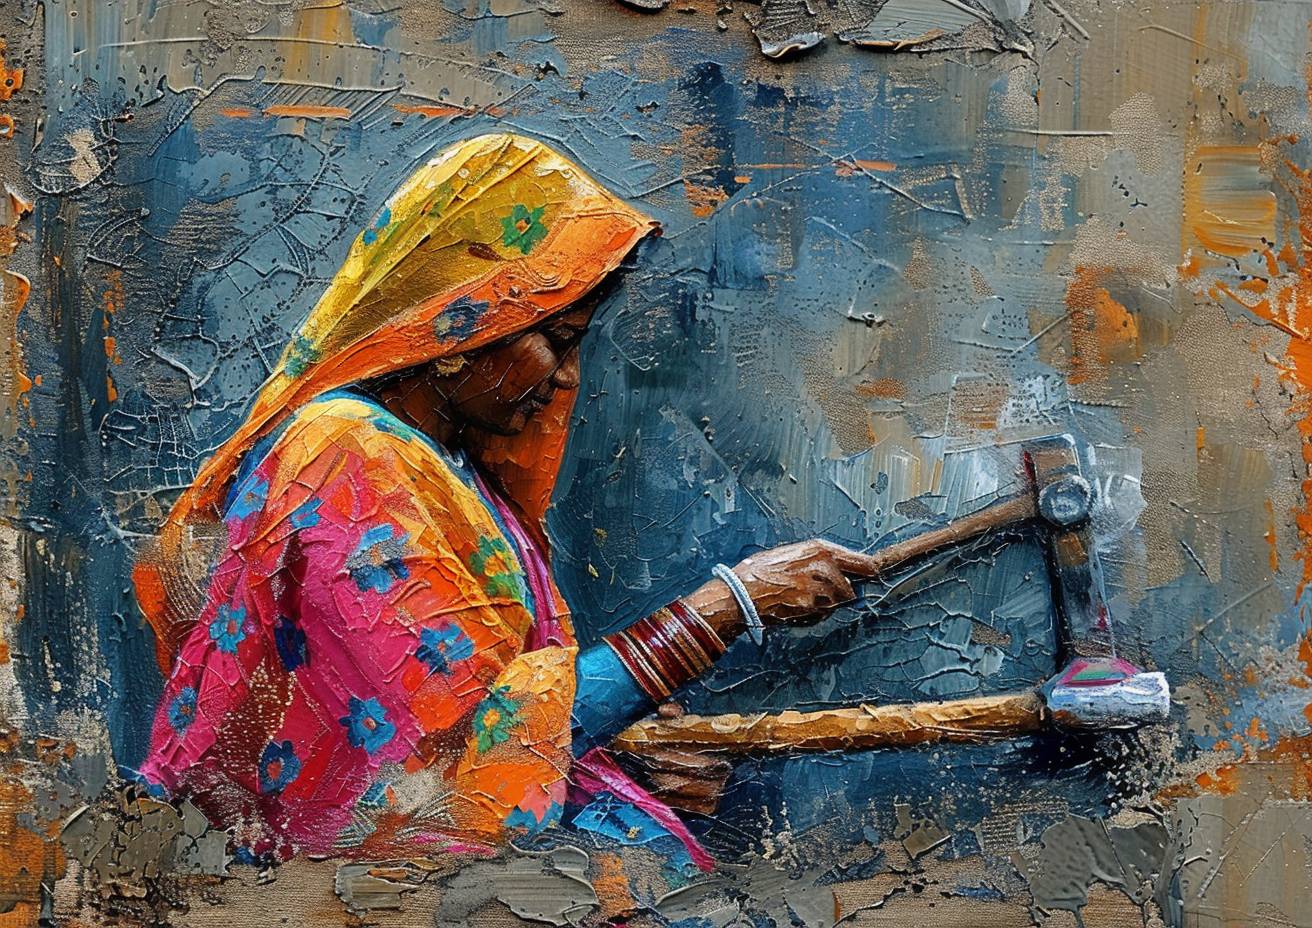 Dry brush painting on distressed canvas, Indian woman labourer, side profile, colourful sari, wielding a hammer, strong visual flow.